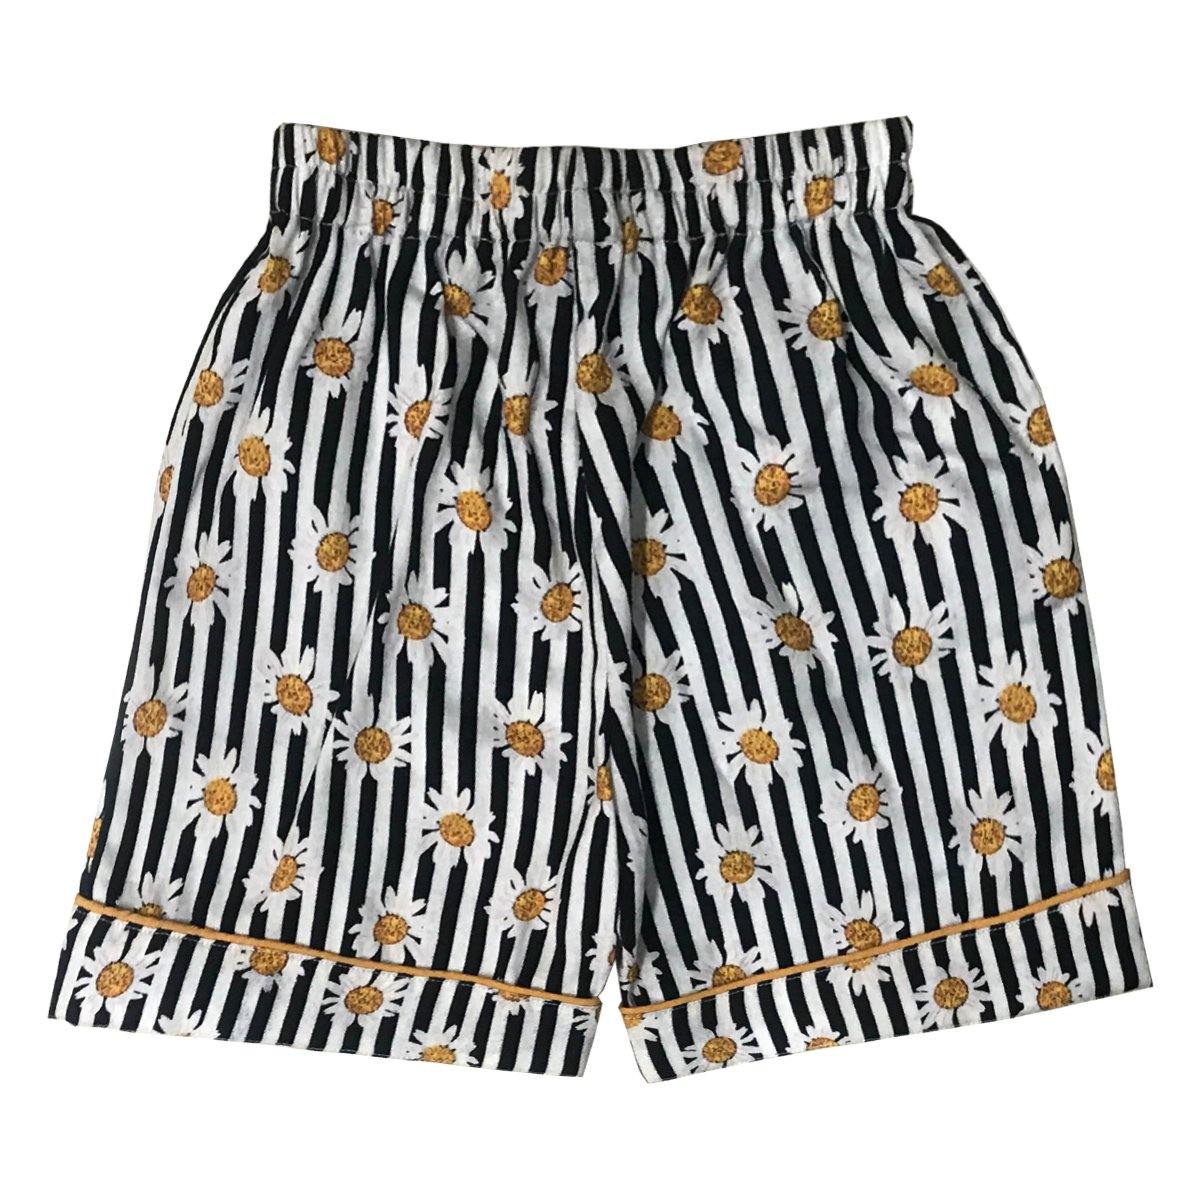 Shorts for Girls - Daisy Flower Joey Care